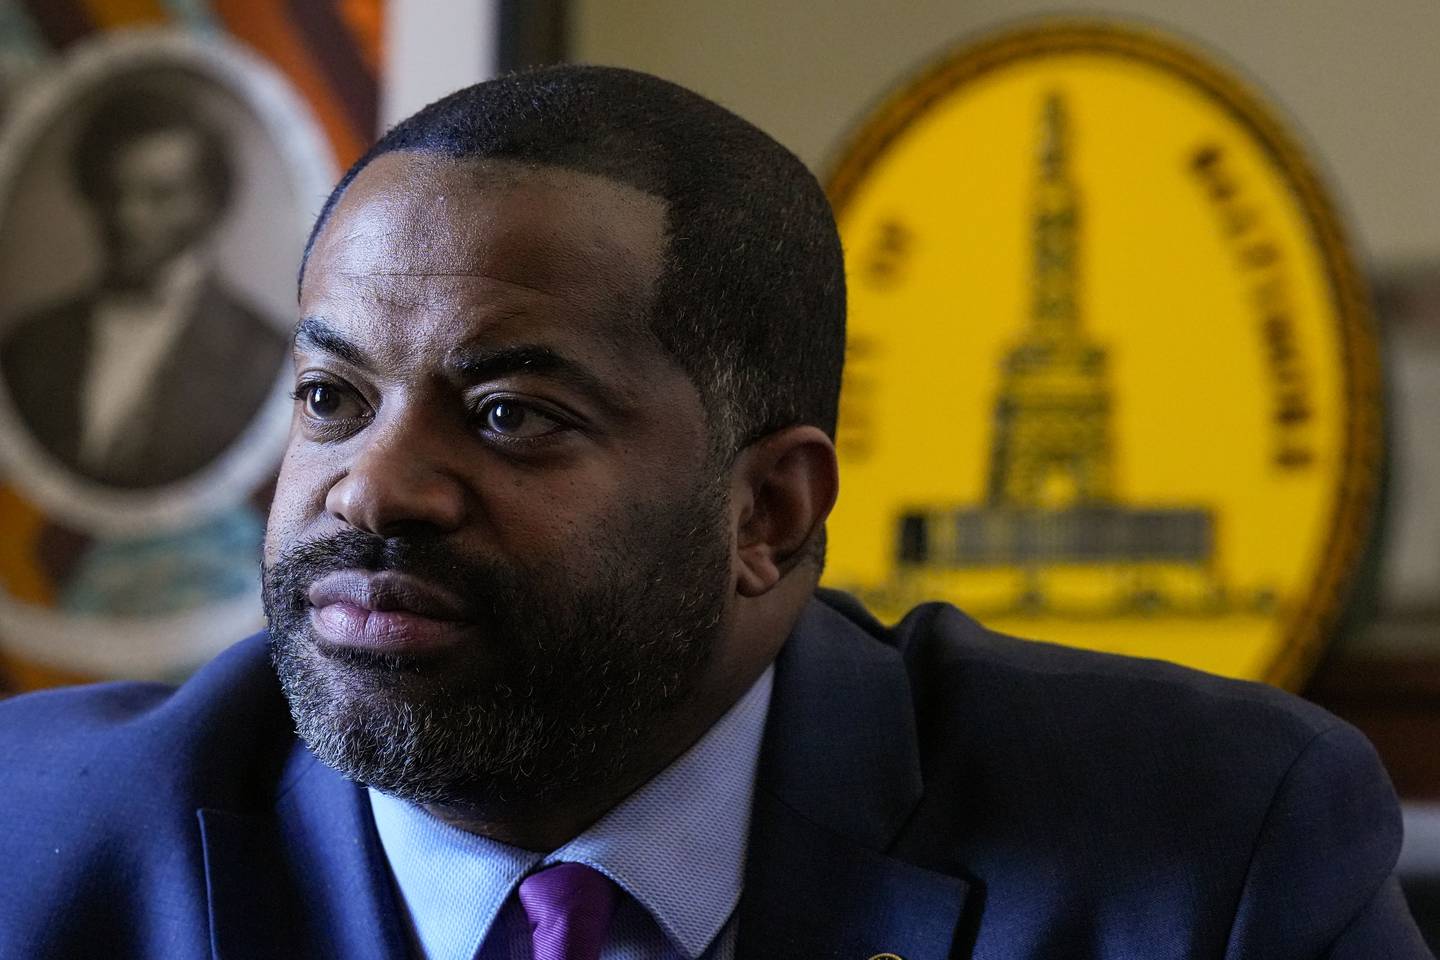 Baltimore City Council President Nick Mosby is photographed in his City Hall office during an interview on Wednesday, March 15.